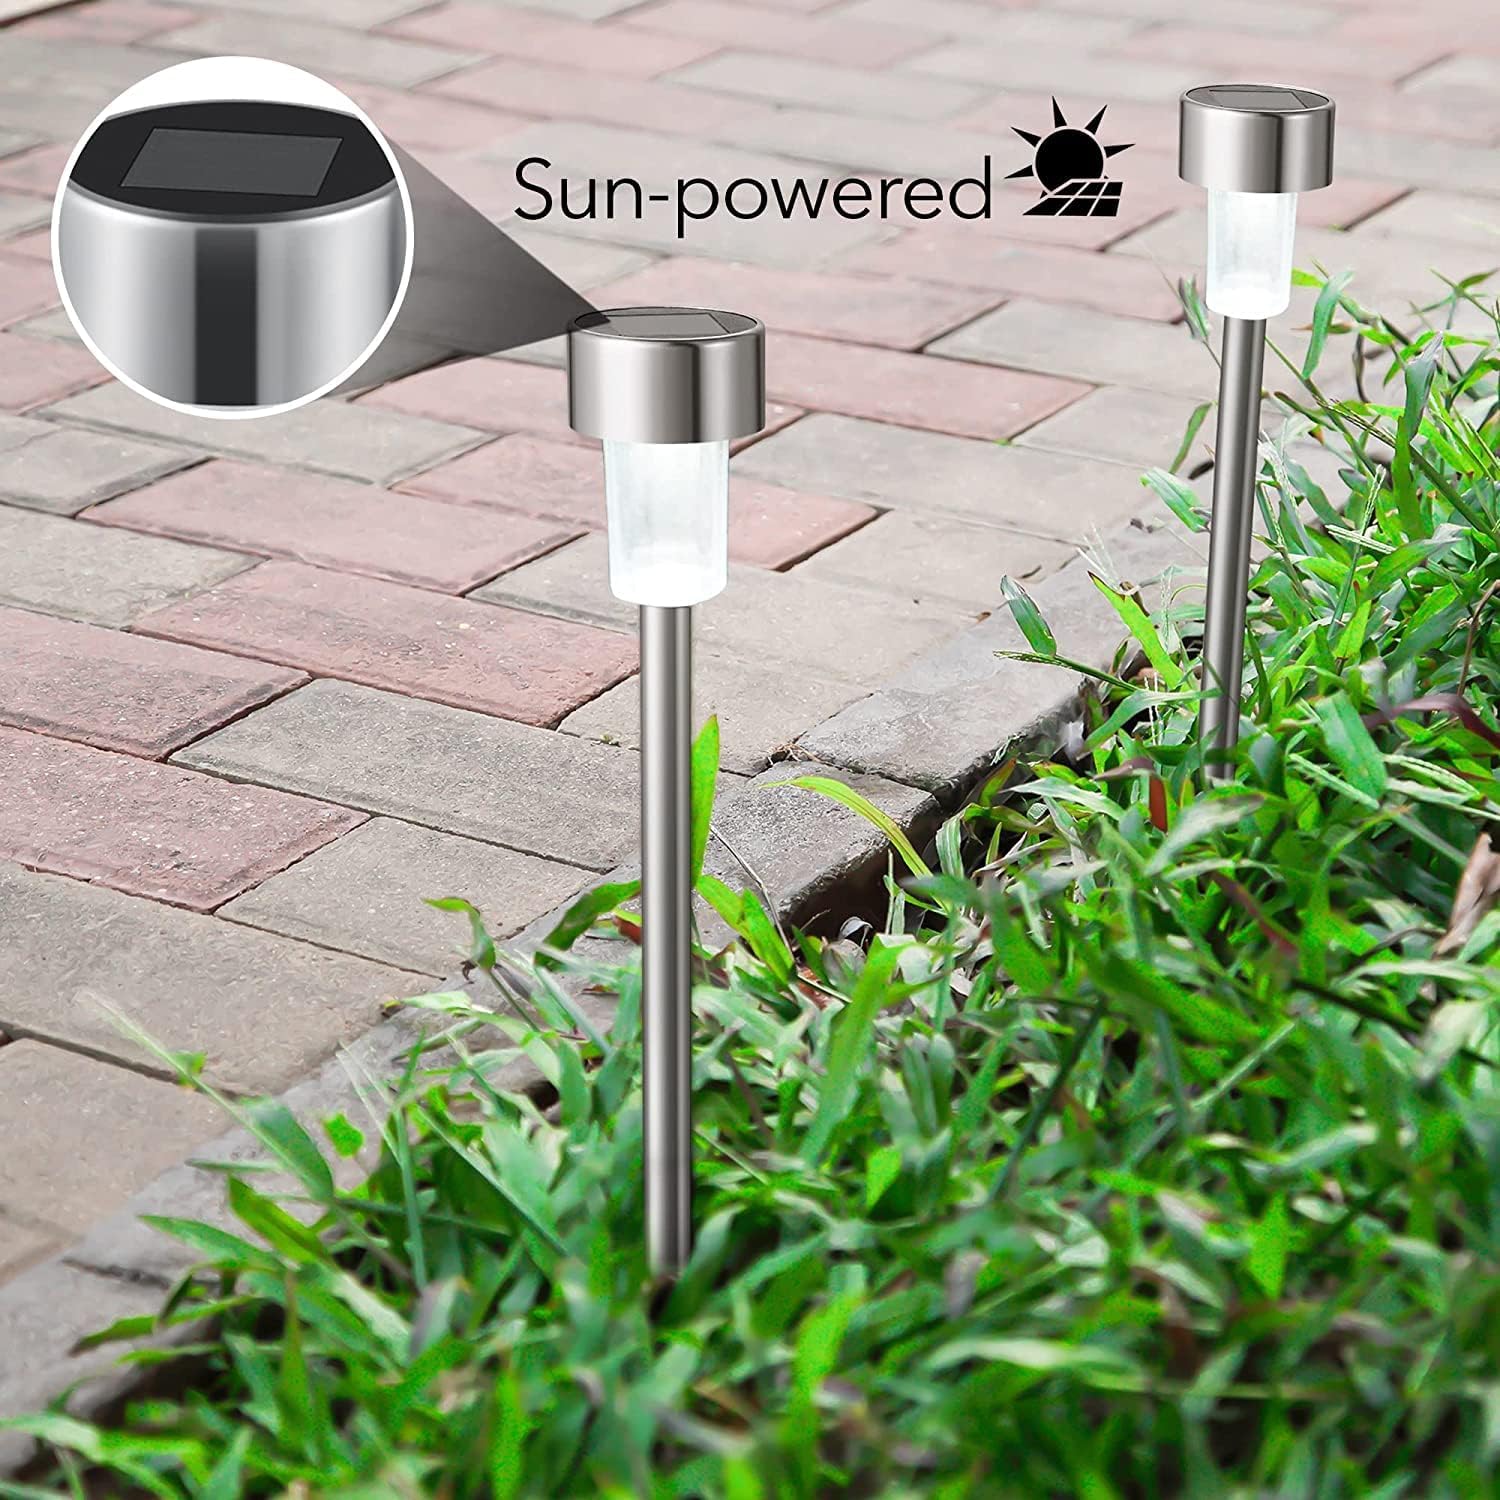 Solar Pathway LED Lights: Outdoor Solar Lights for Your Yard, Pathway, Lawn, Patio, or Driveway - Al Ghani Stores